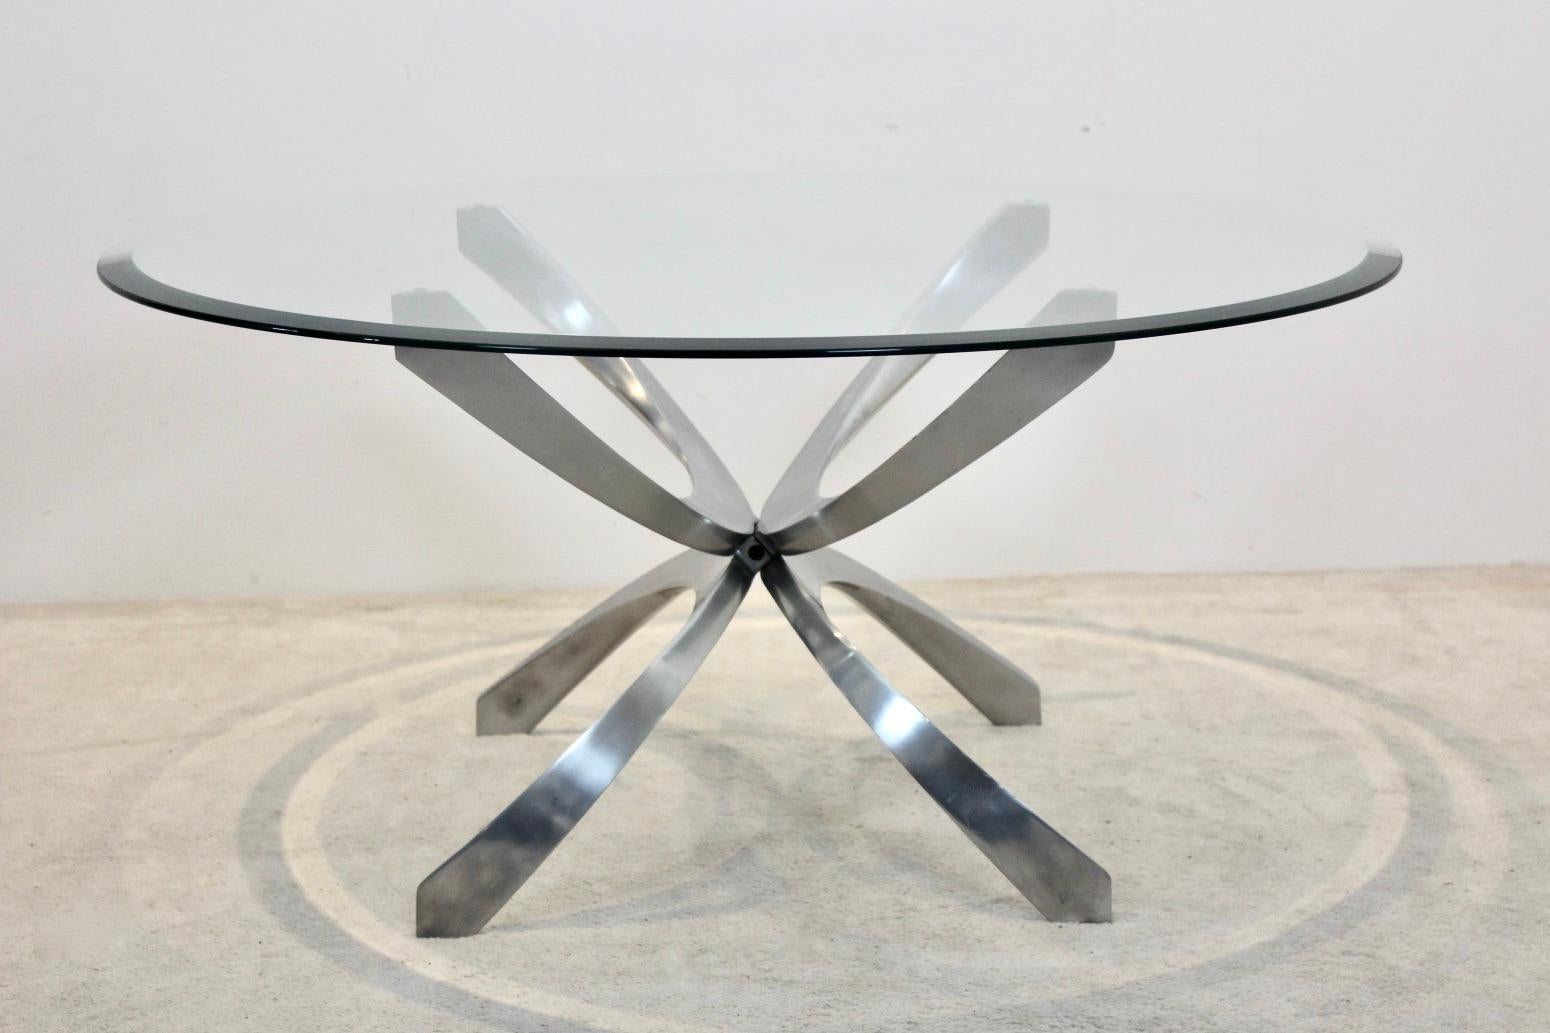 A modernist aluminum glass coffee table, was designed by Knut Hesterberg for Ronald Schmitt, Germany, 1970s. While a glass plate topped the table, the polished aluminum base shows a futuristic shape that showcases from any angle. A statement table